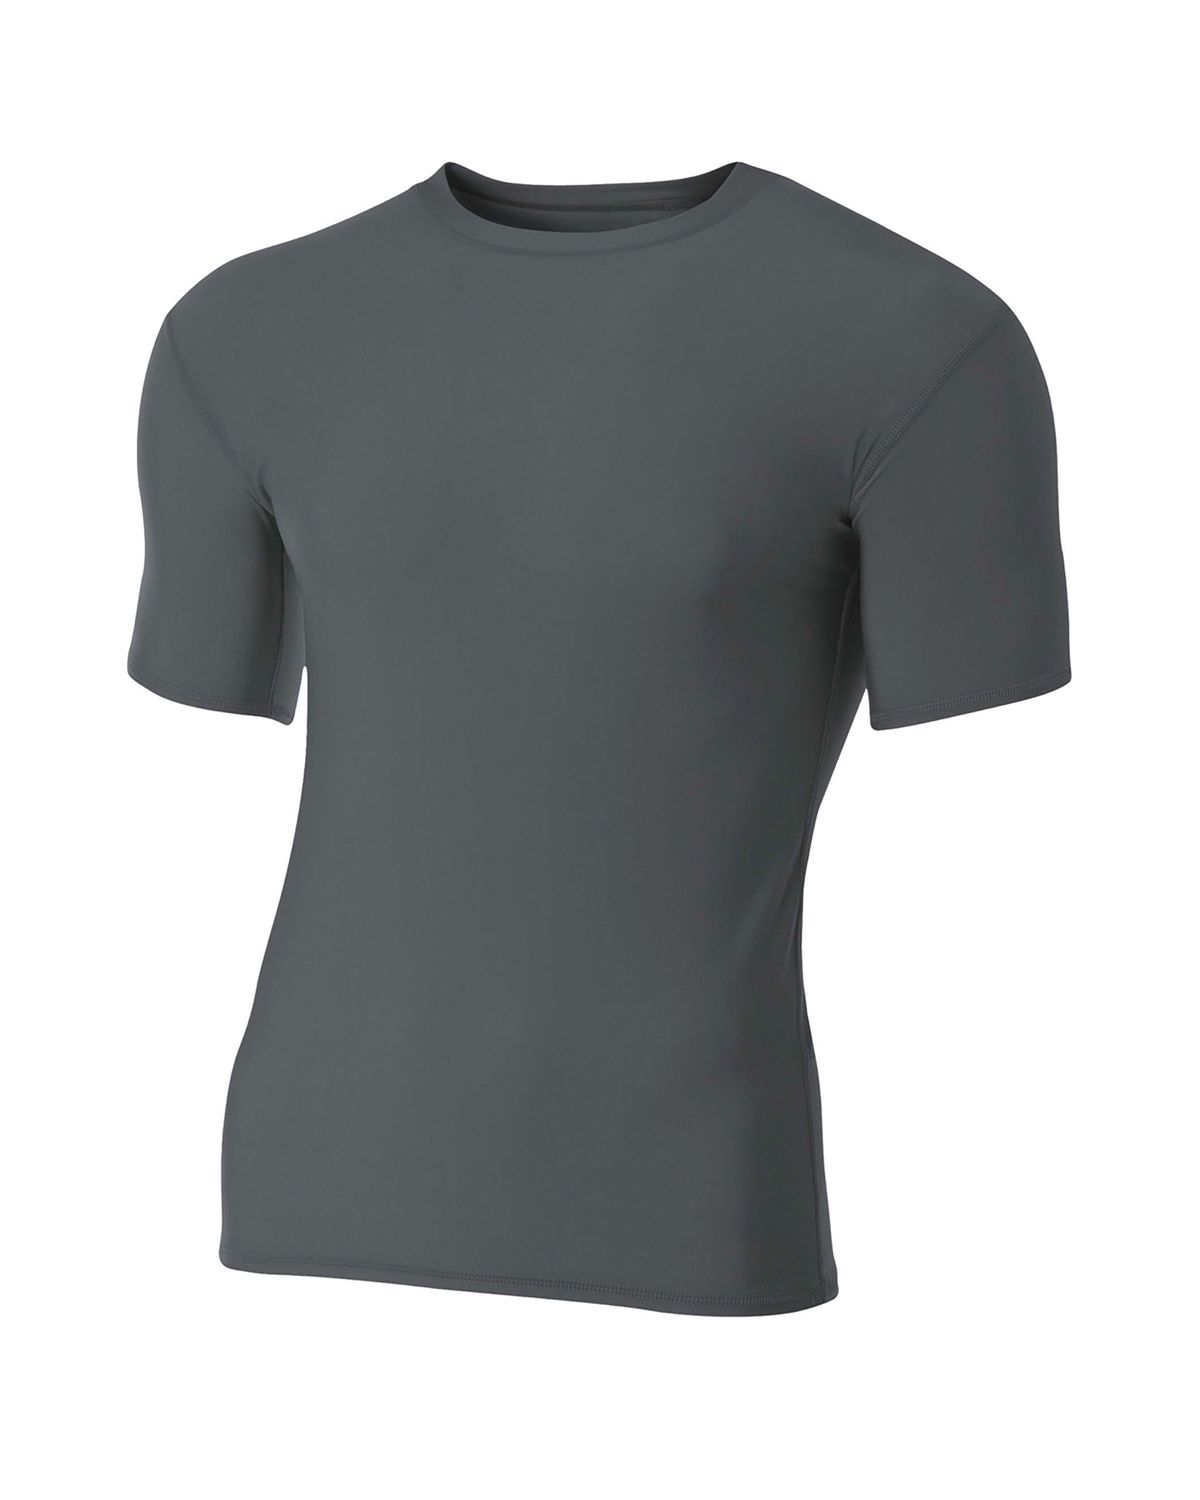 'A4 N3130 Adult Polyester Spandex Short Sleeve Compression T-Shirt'